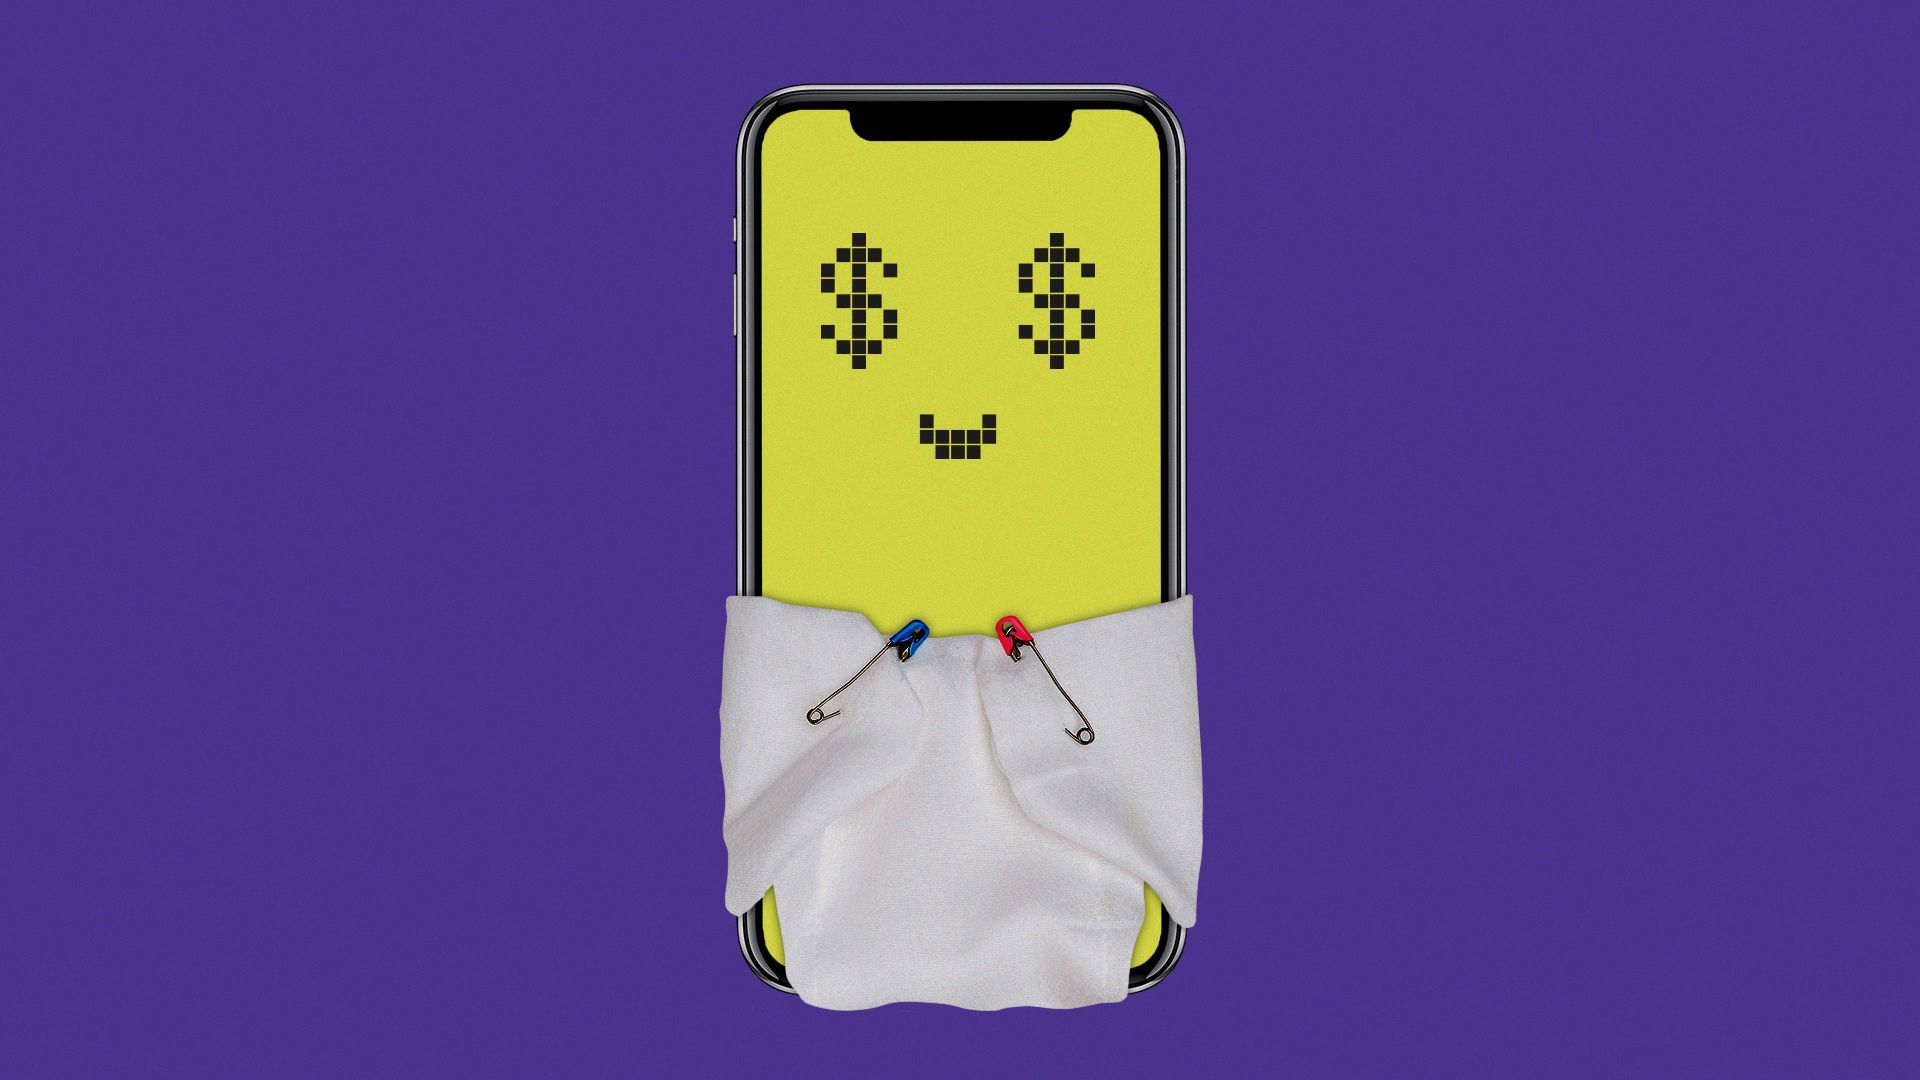 Illustration of a cell phone wearing a cloth diaper. The phone has a digitized smiling face with dollar signs for eyes.